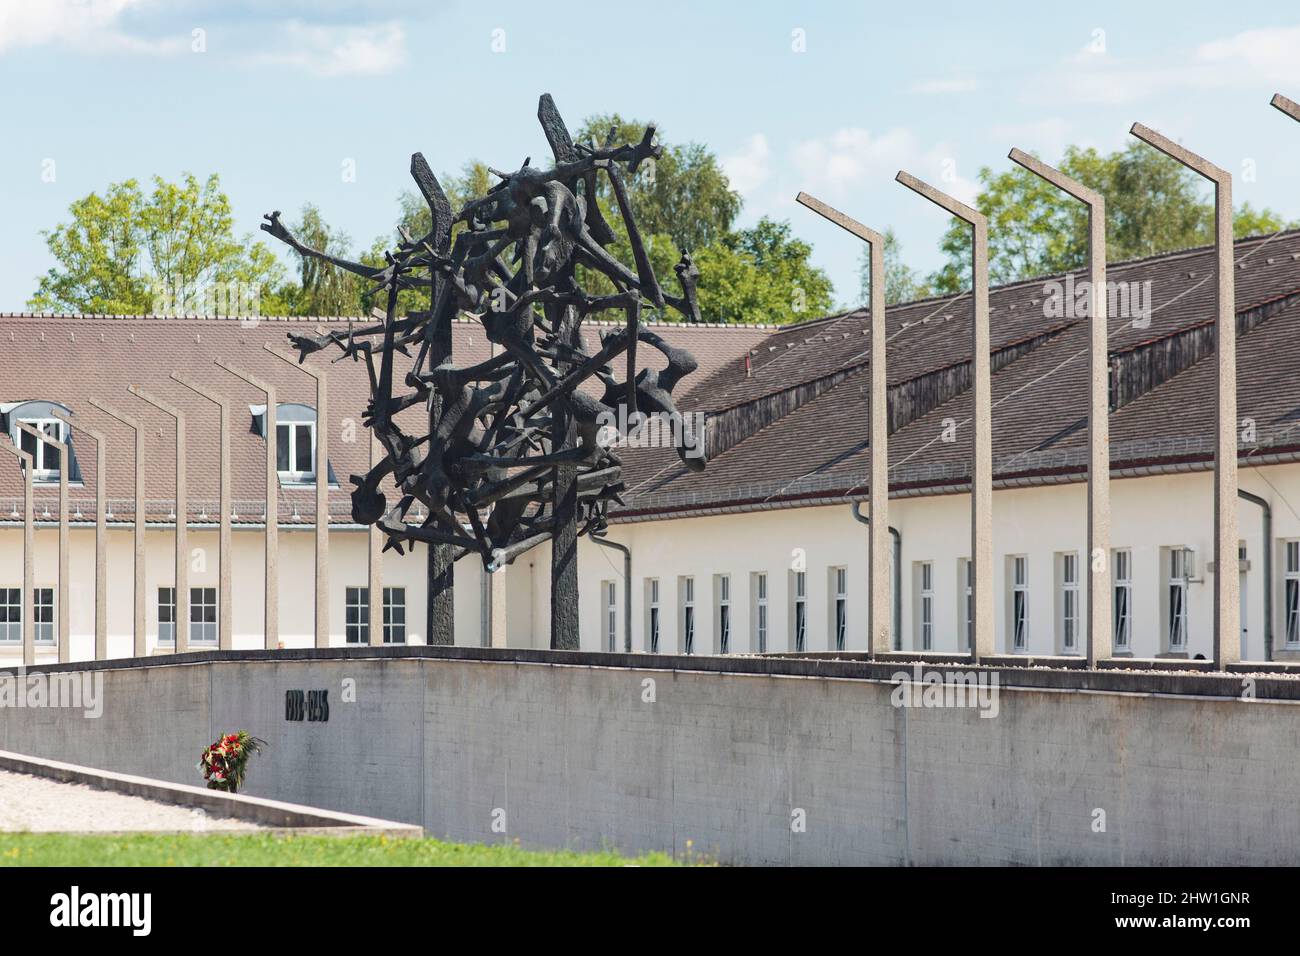 Germany, Bavaria, Dachau, Concentration Camp, memorial monument designed by sculptor Nandor Glid and delivered in 1968 Stock Photo